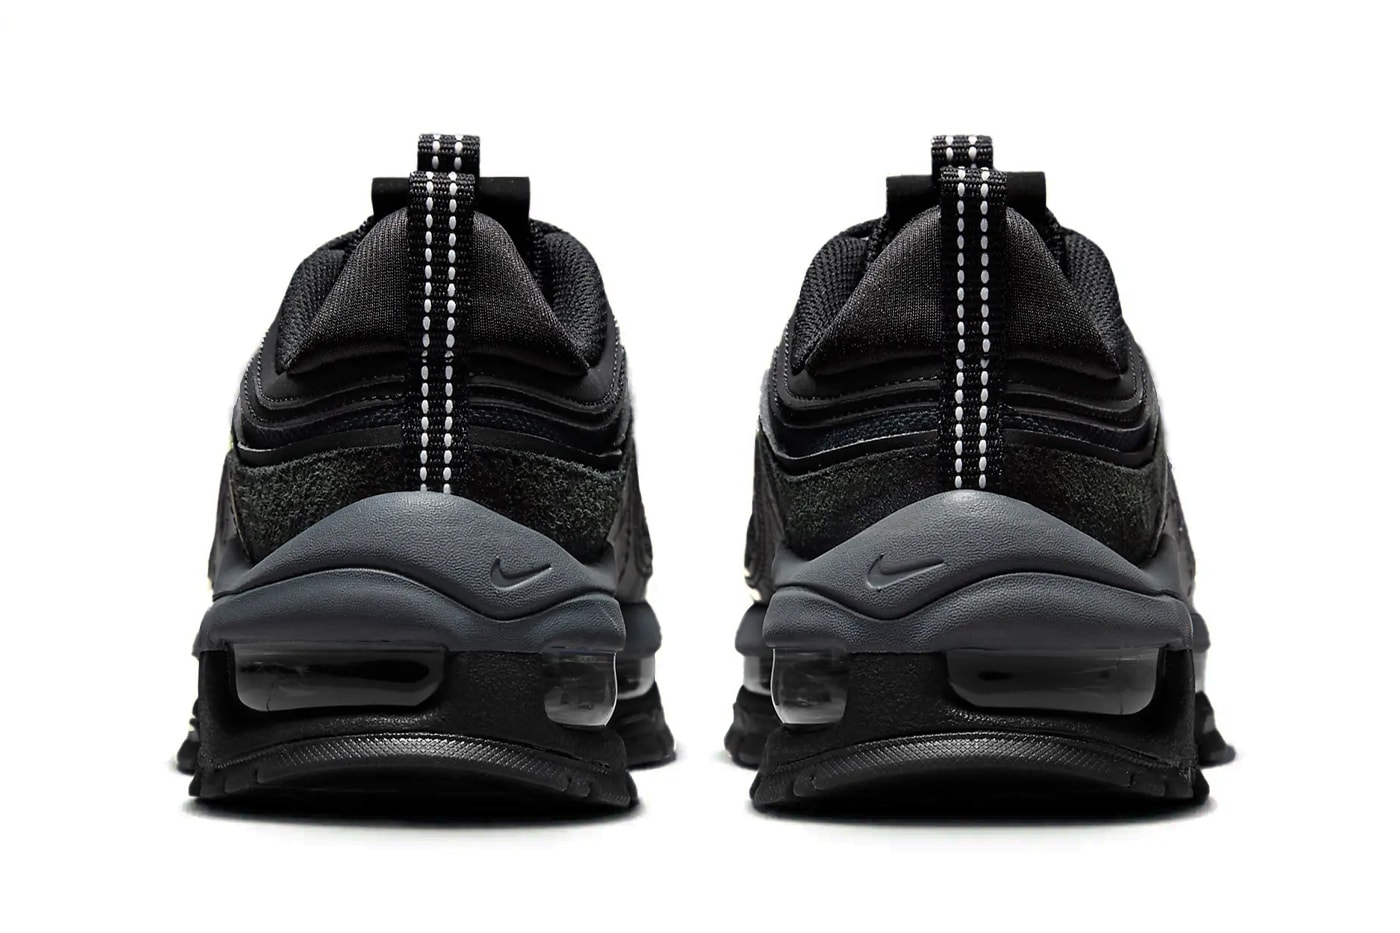 Nike Air Max 97 Futura Surfaces in Stealthy "Triple Black" FB4496-002 release info swoosh sneakers oversized technical dad shoes subtle all black